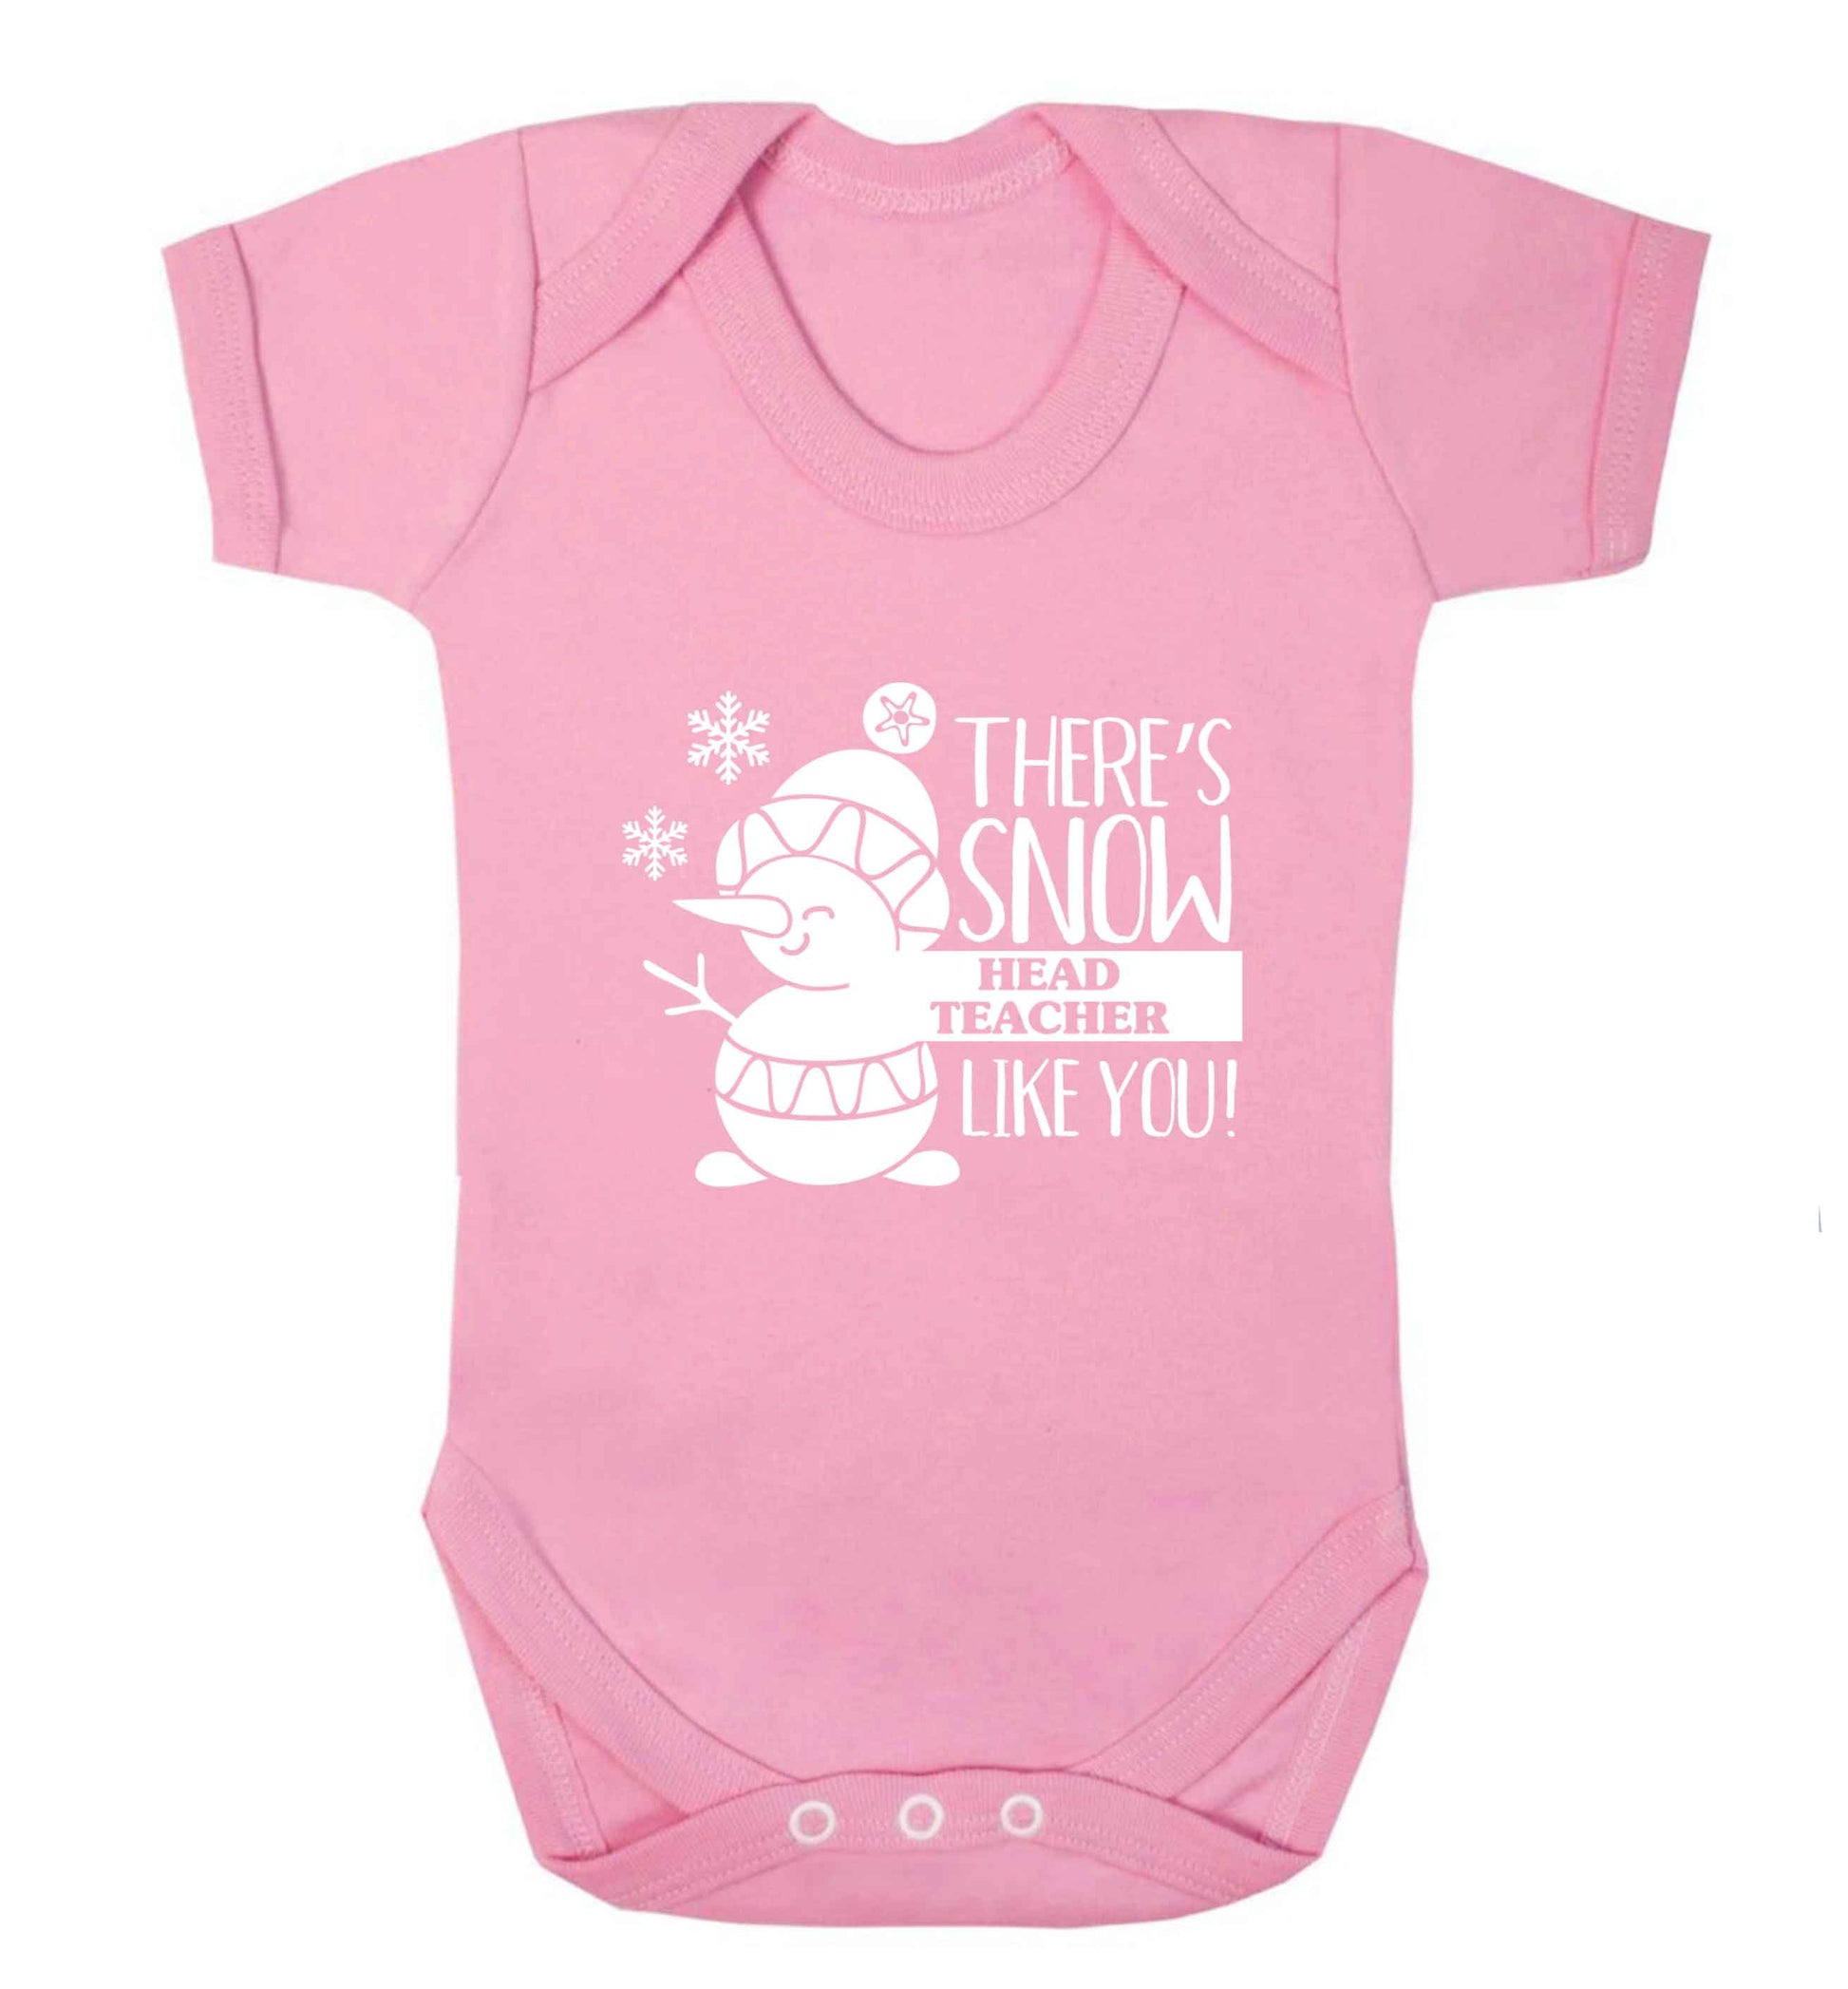 There's snow head teacher like you baby vest pale pink 18-24 months